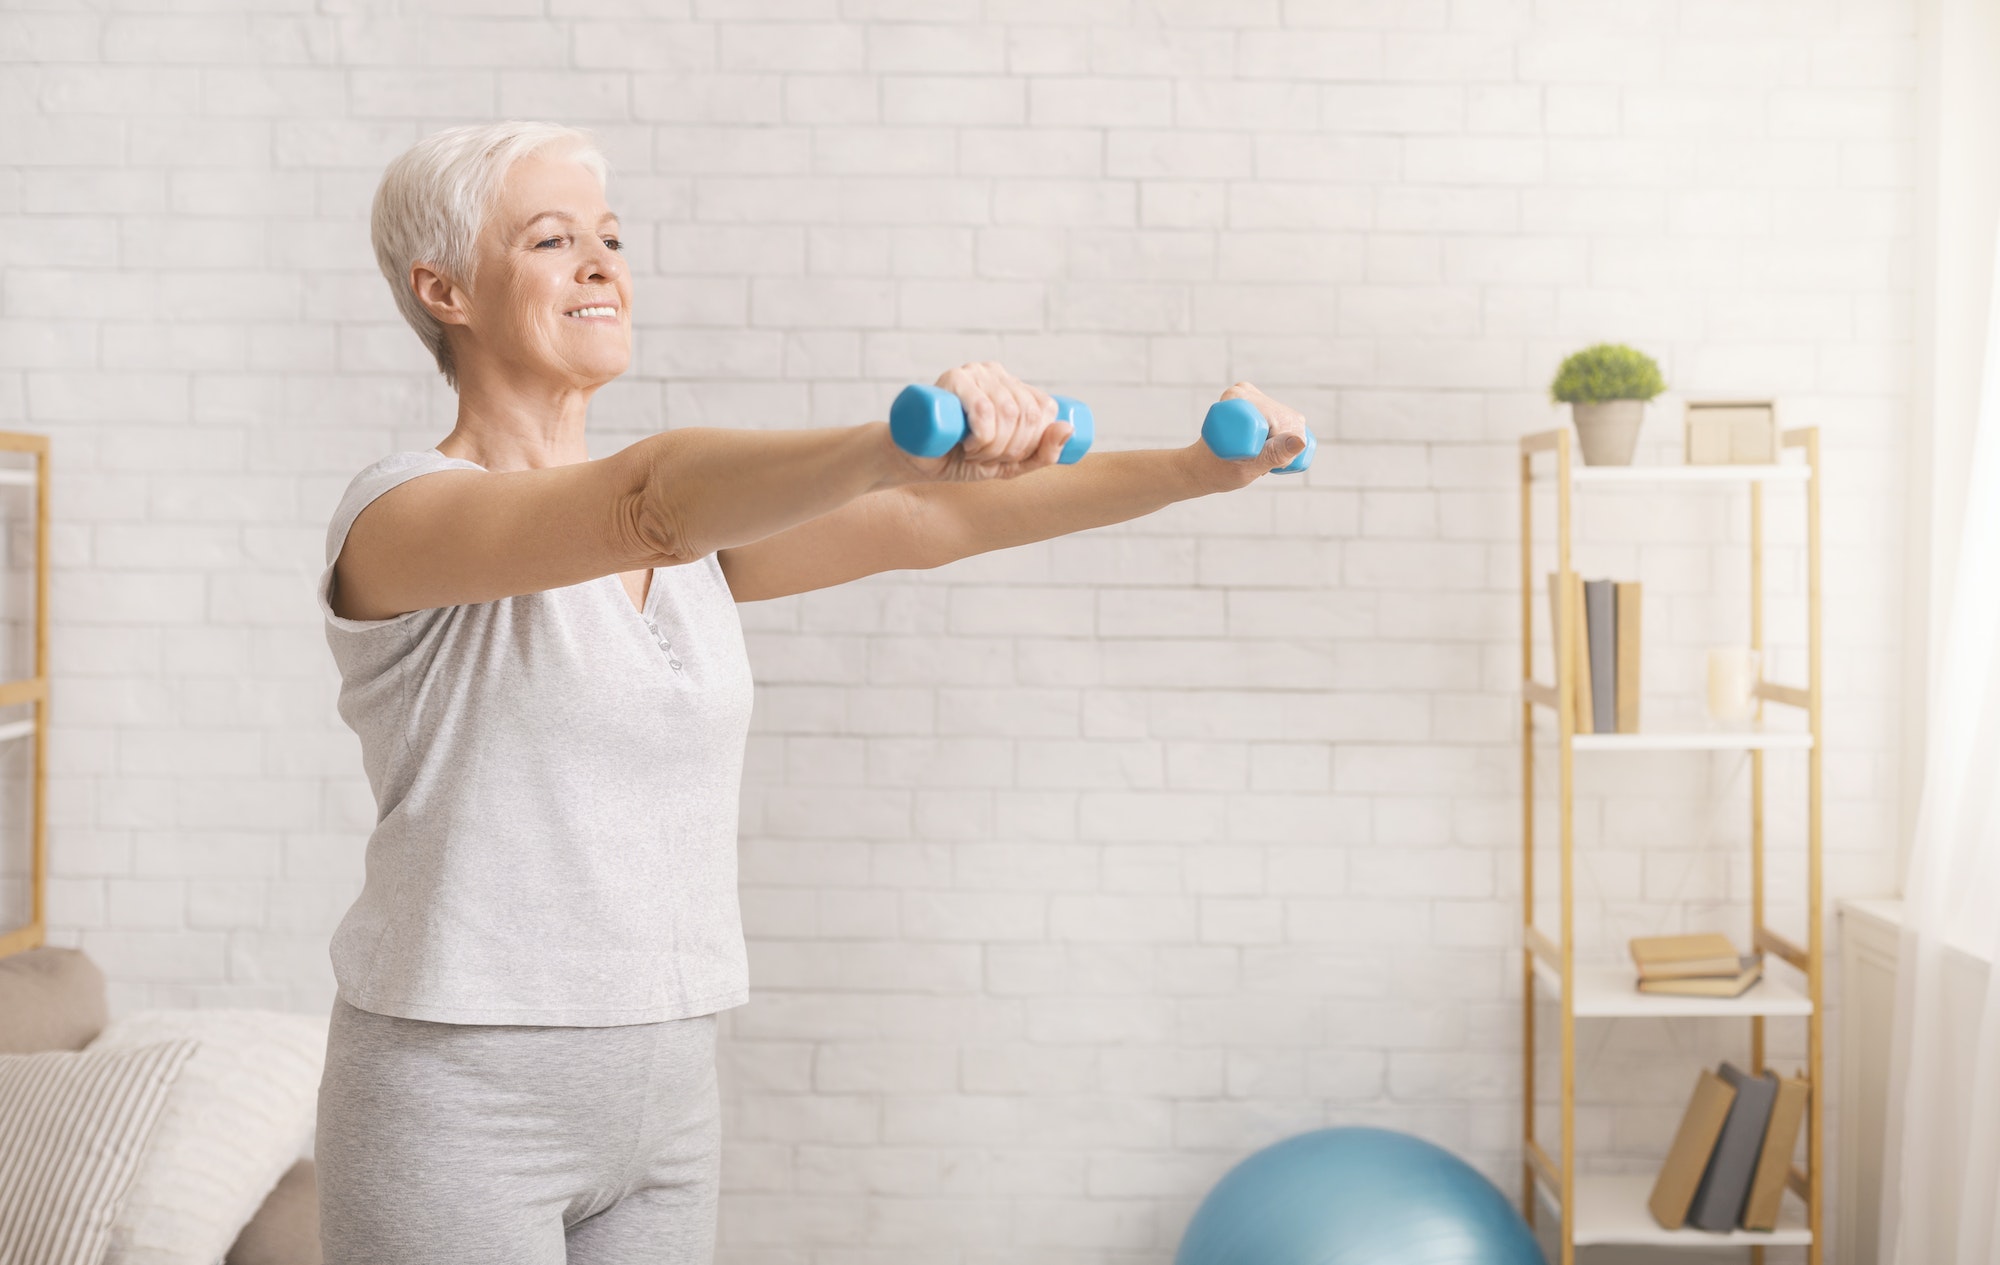 Senior woman exercising with dumbbells at home